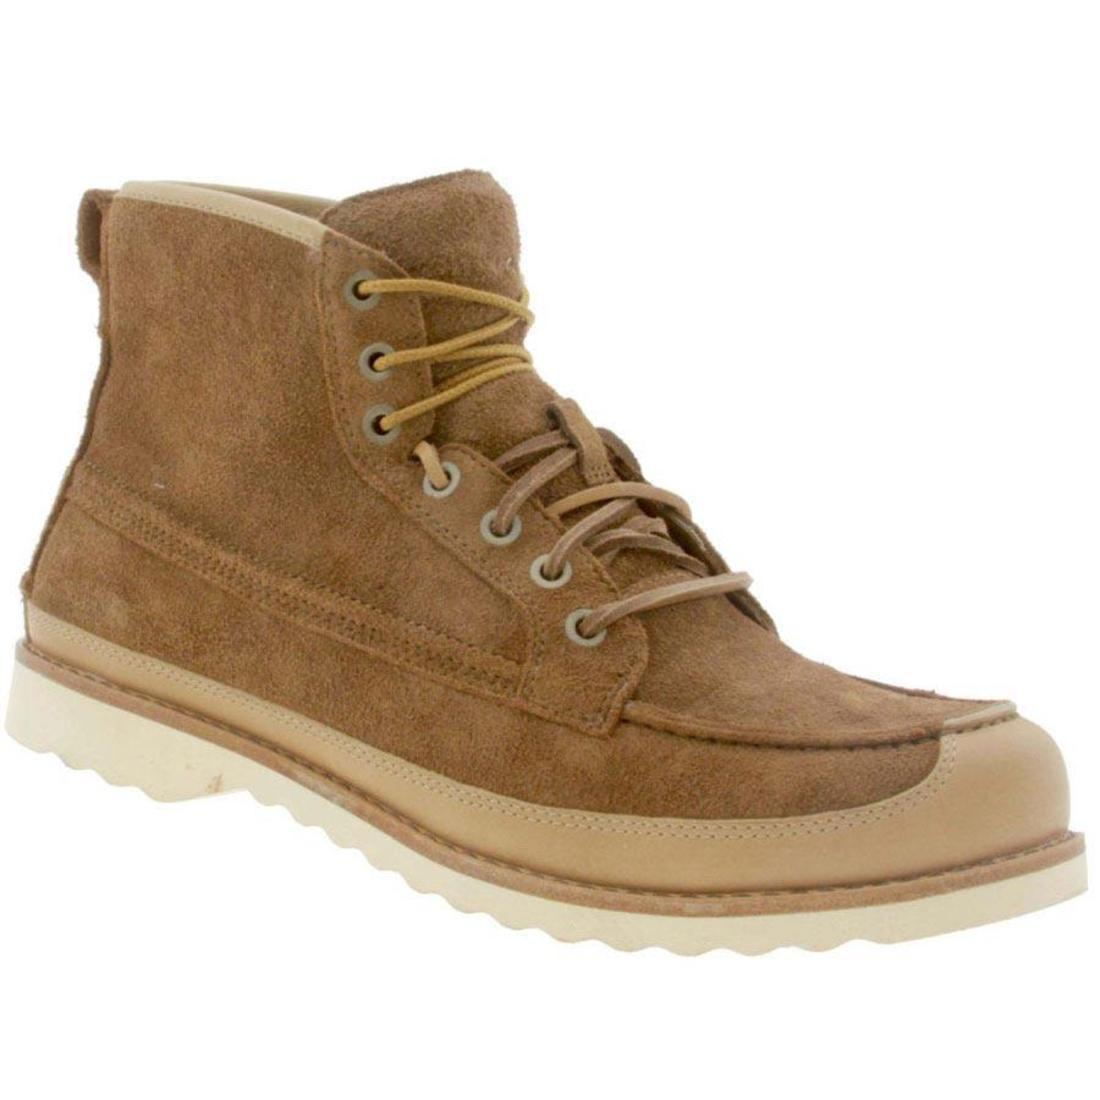 Timberland Abington 7-Eye Men's Brown Suede Leather Moc Toe Boots 82568 ...